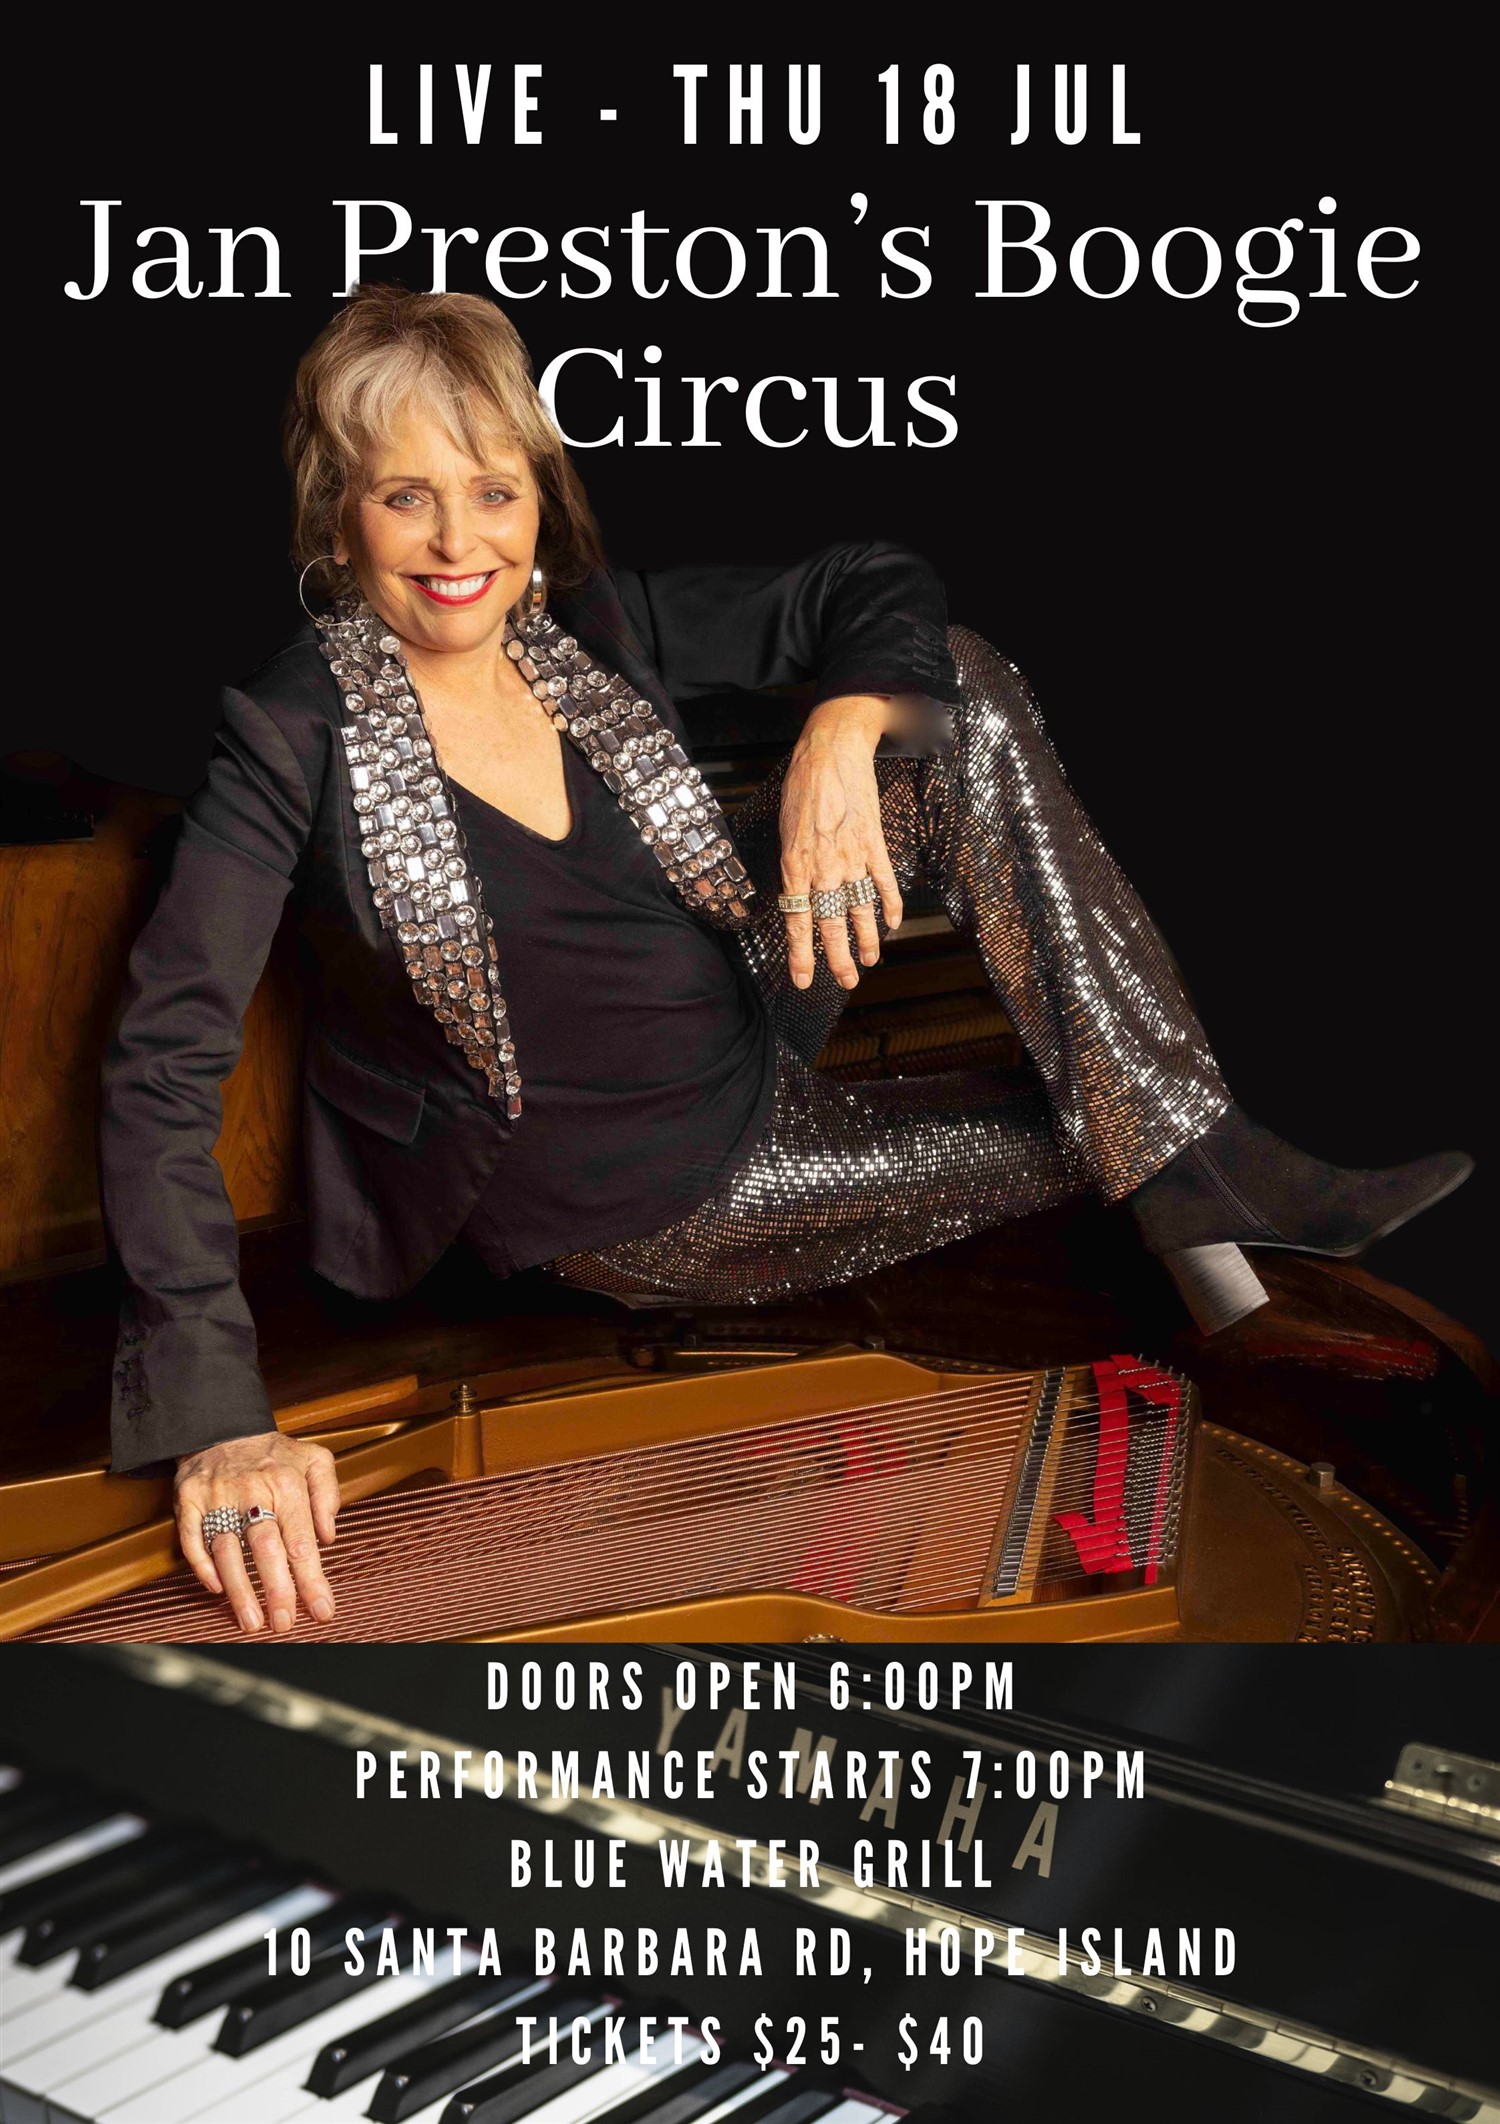 Jan Preston's Boogie Circus  on Jul 18, 18:00@Hope Island Jazz - Blue Water Grill - Buy tickets and Get information on Hope Island Jazz hopeislandjazz.com.au